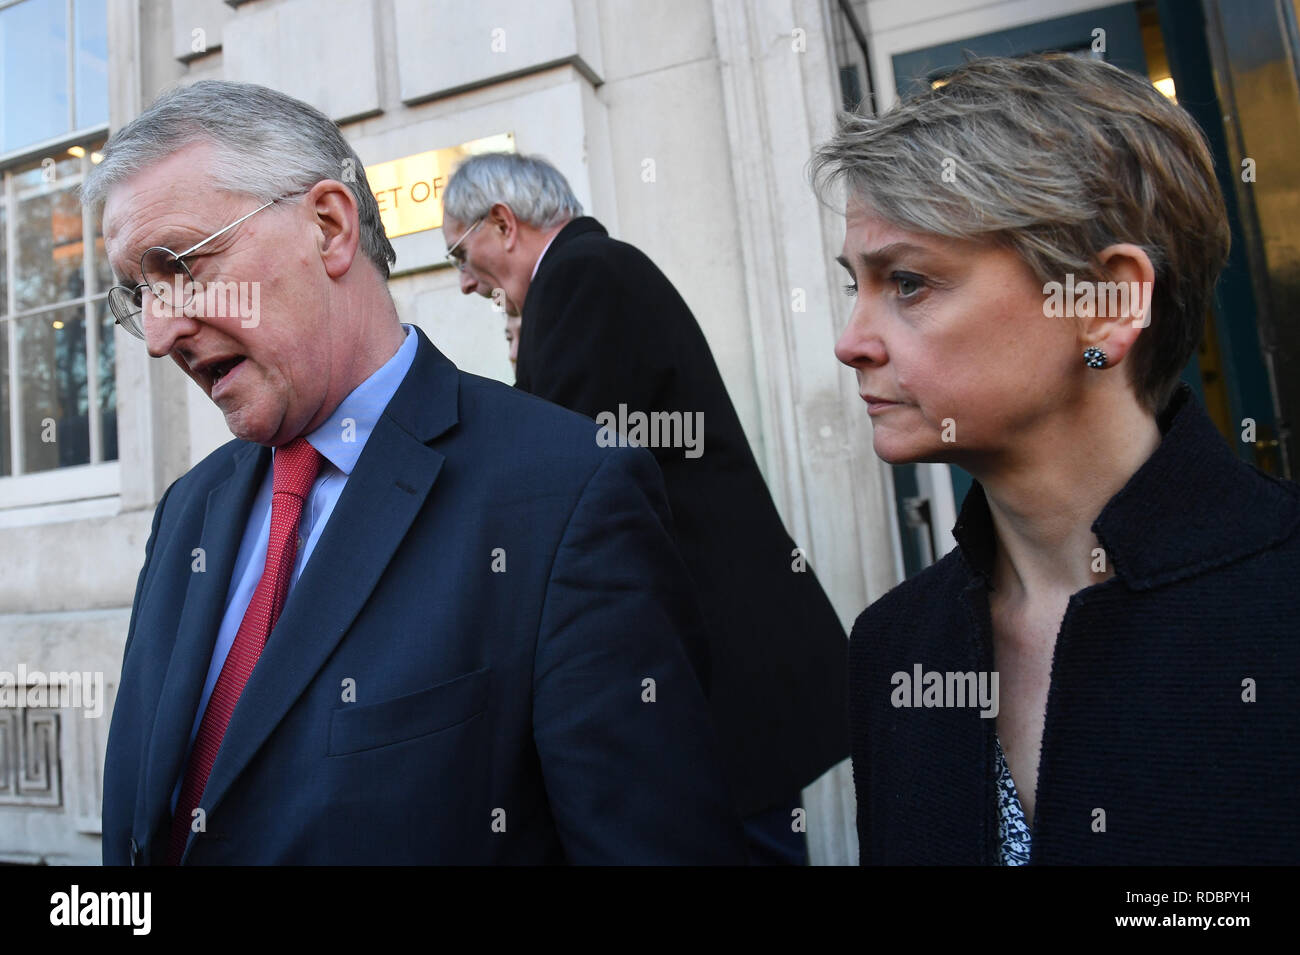 Labour MPs Hilary Benn and Yvette Cooper in Whitehall, London speaks to media as Peter Bone leaves the Cabinet Office, after the Prime Minister announced that she would invite party leaders in the Commons and other MPs in for discussion to get a Parliamentary consensus on the way forward over Brexit. Stock Photo